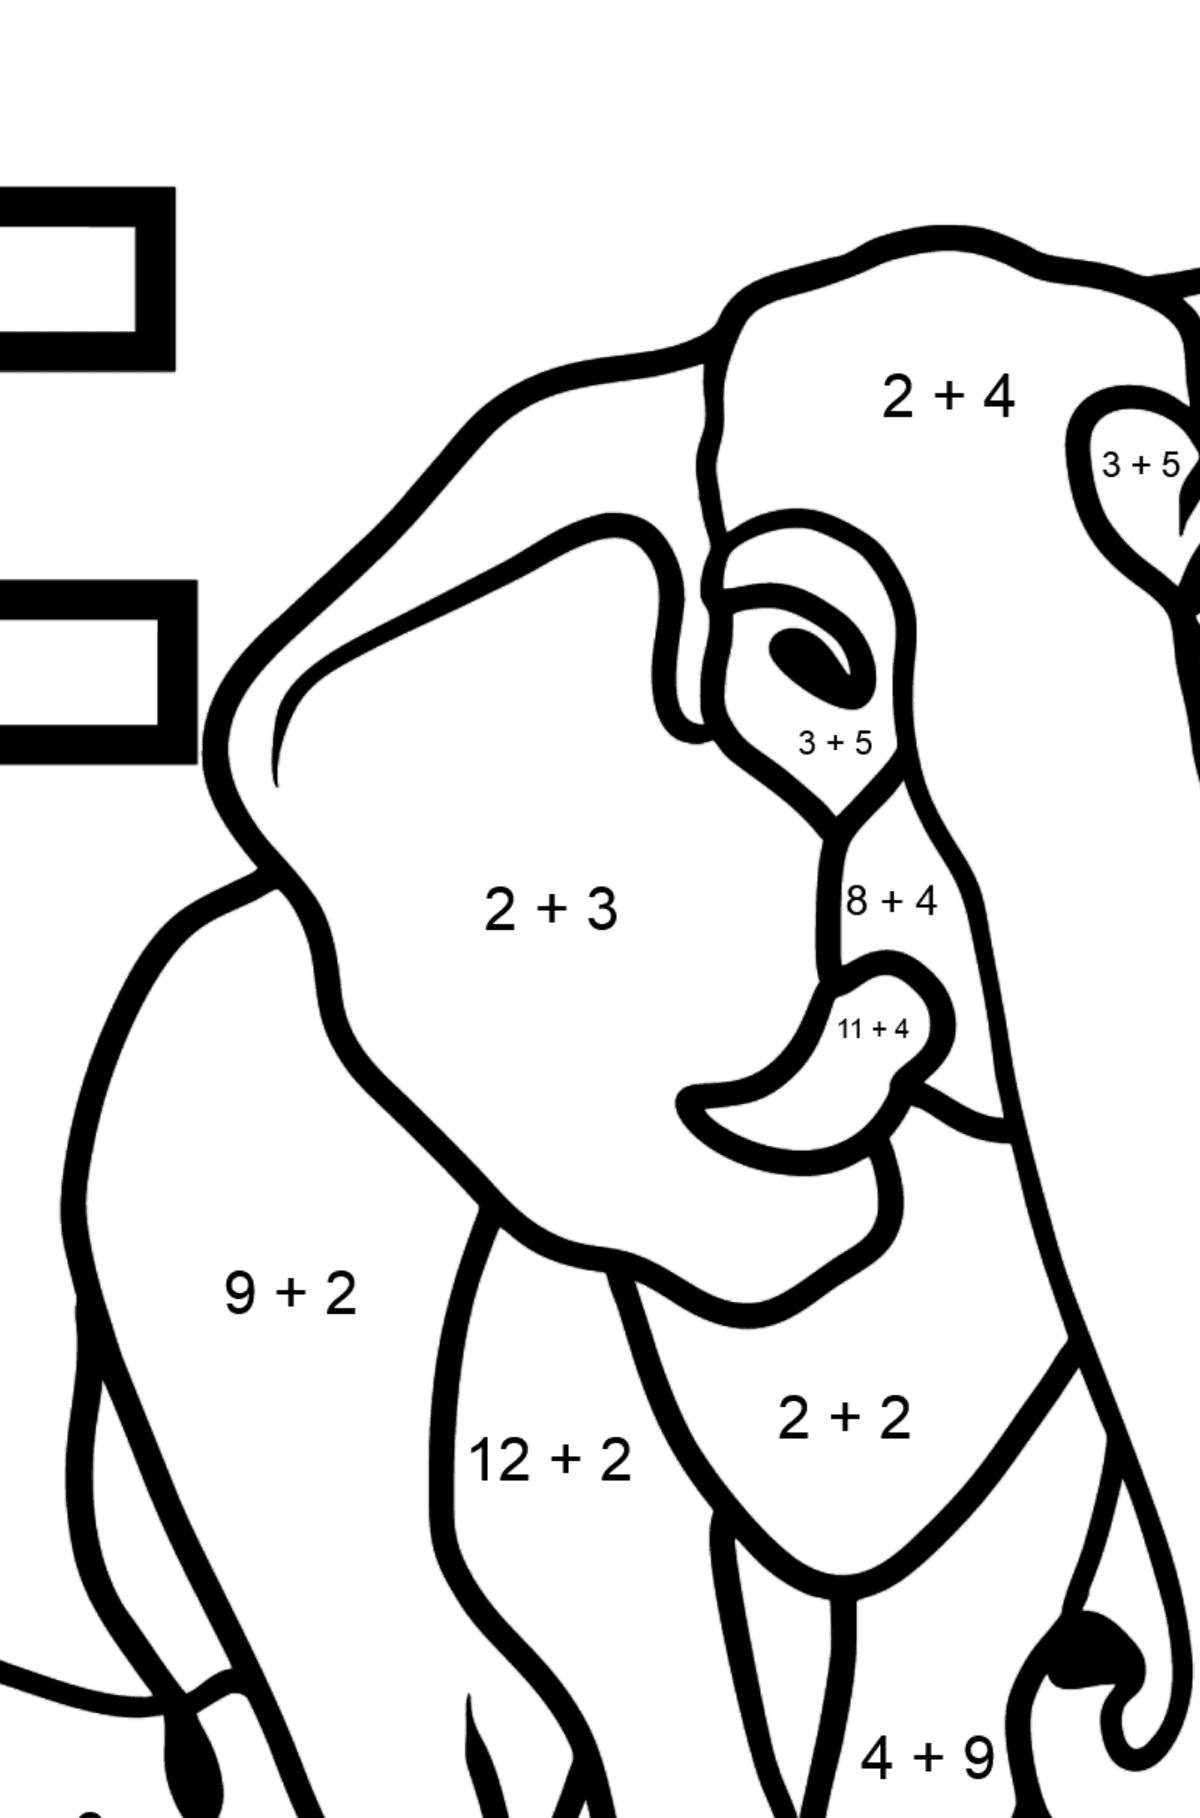 Spanish Letter E coloring pages - ELEFANTE - Math Coloring - Addition for Kids